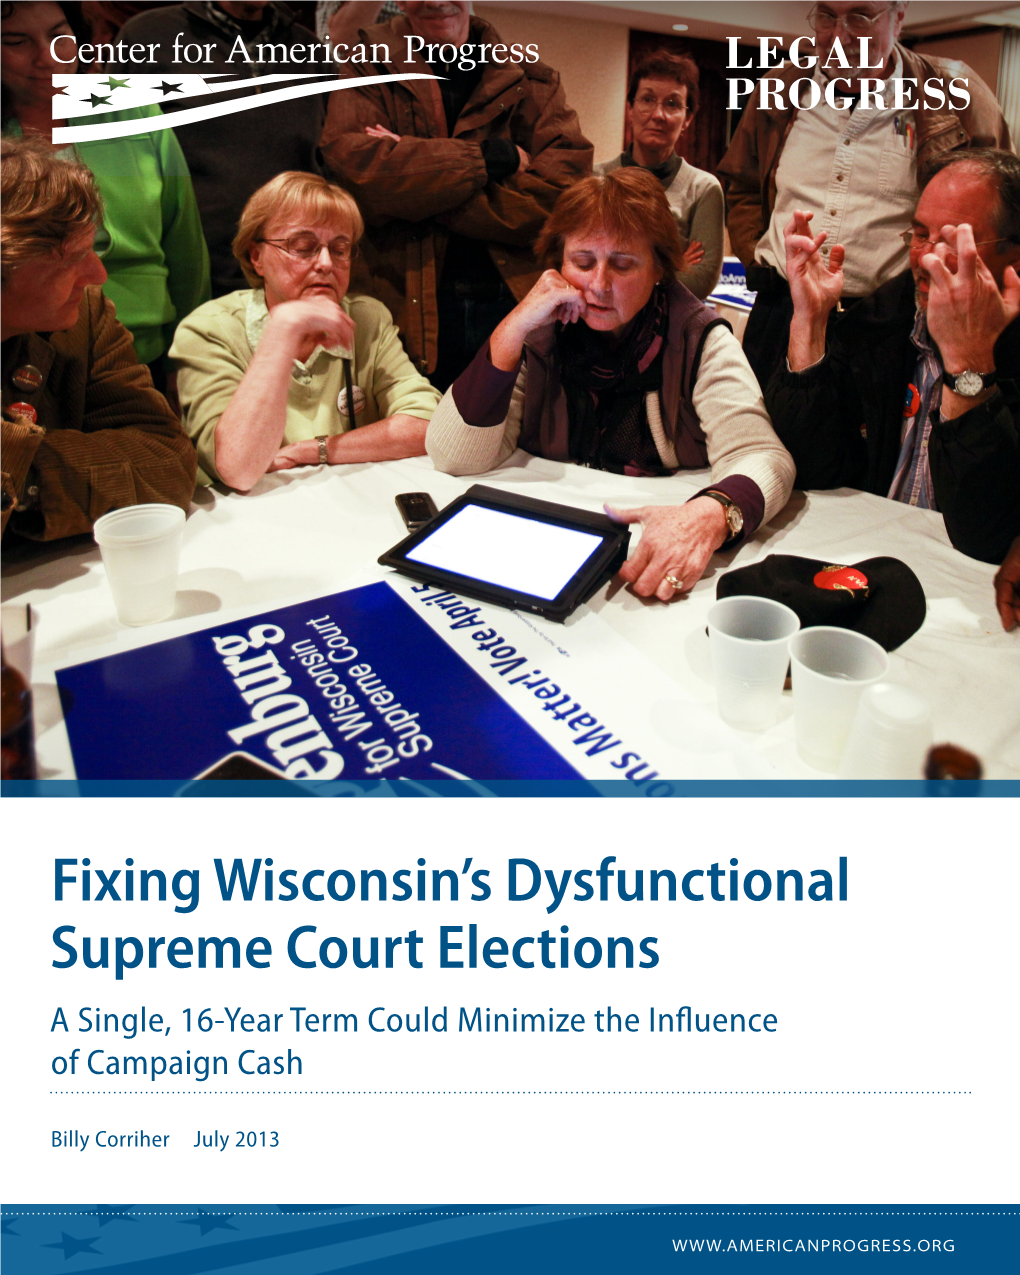 Fixing Wisconsin's Dysfunctional Supreme Court Elections